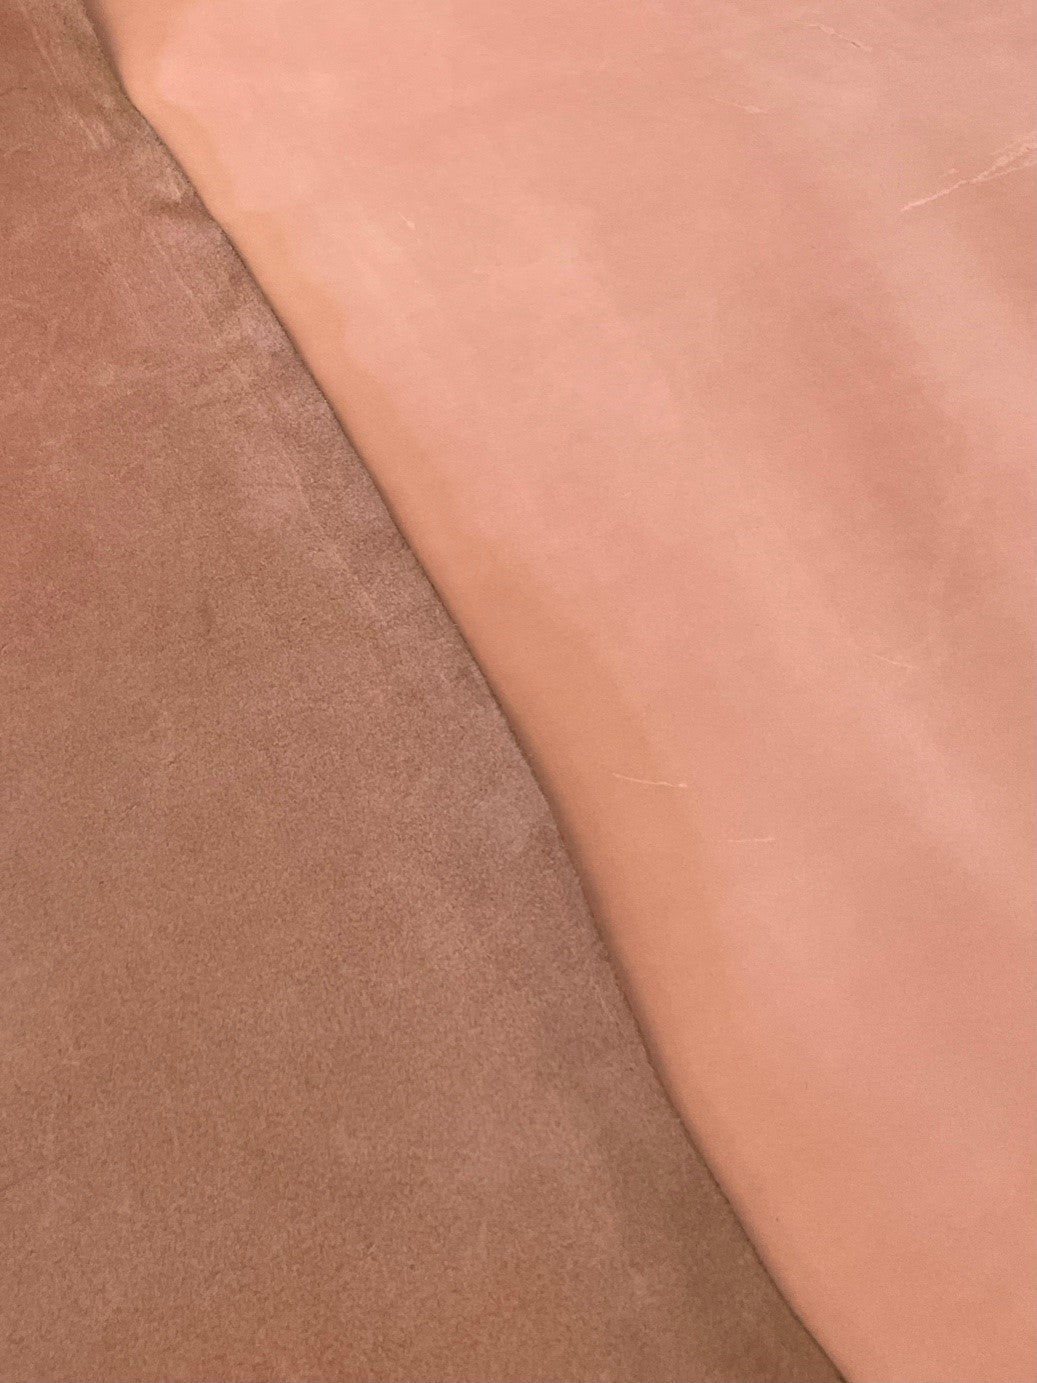 Nubuck Washed Blush Cow Side (Special) | 1.8mm | 16 sq.ft | $115 ea.